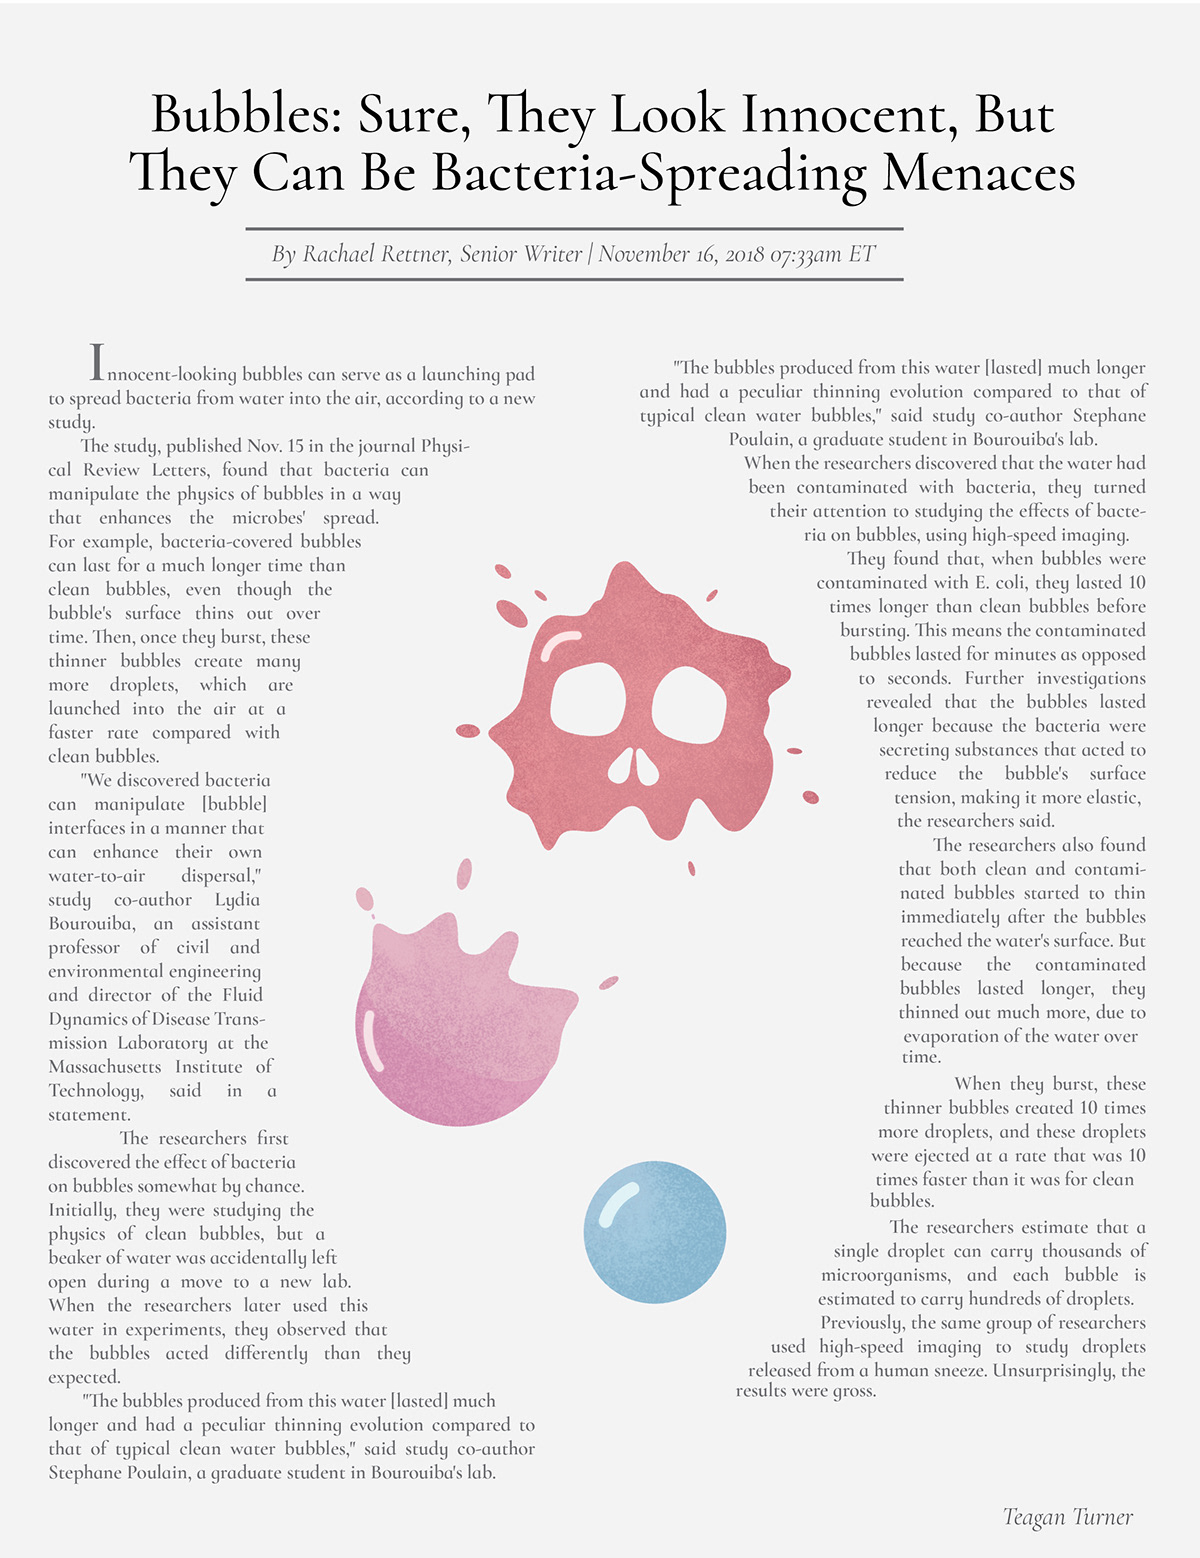 ILLUSTRATION  editorial design story news article